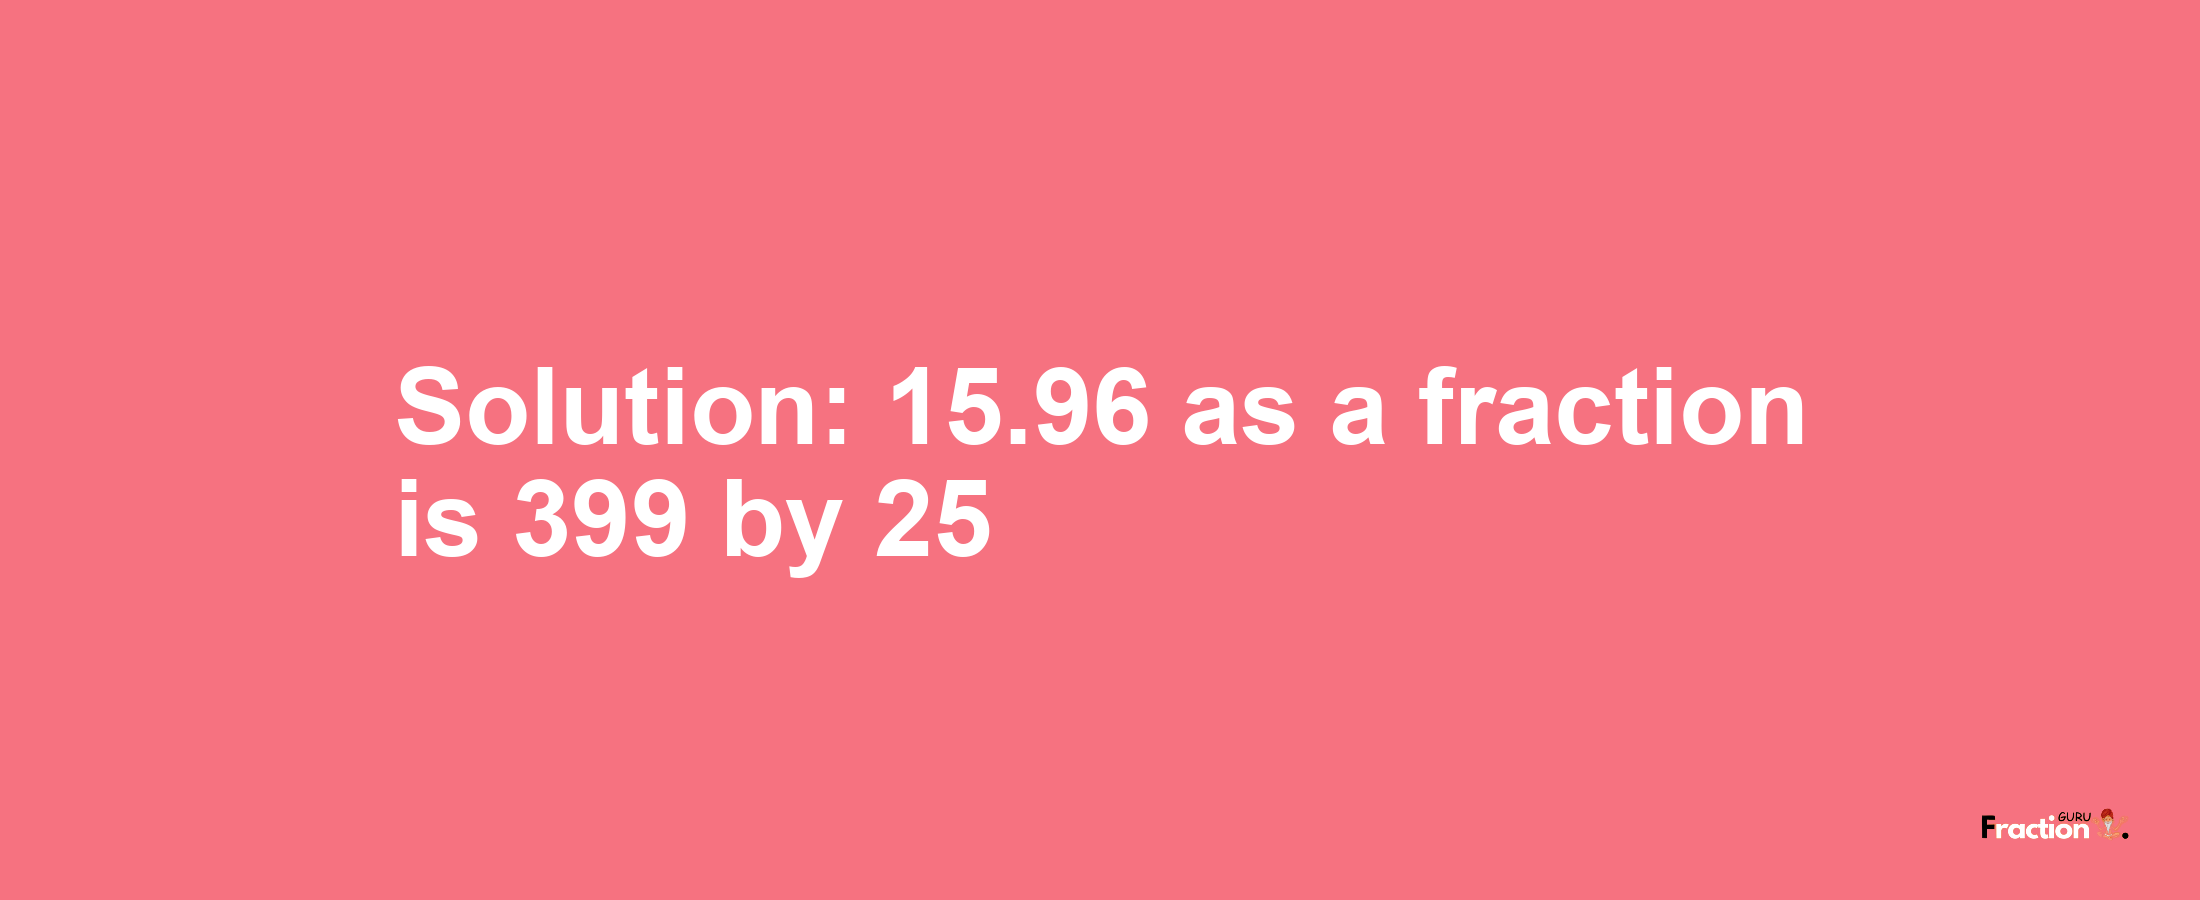 Solution:15.96 as a fraction is 399/25